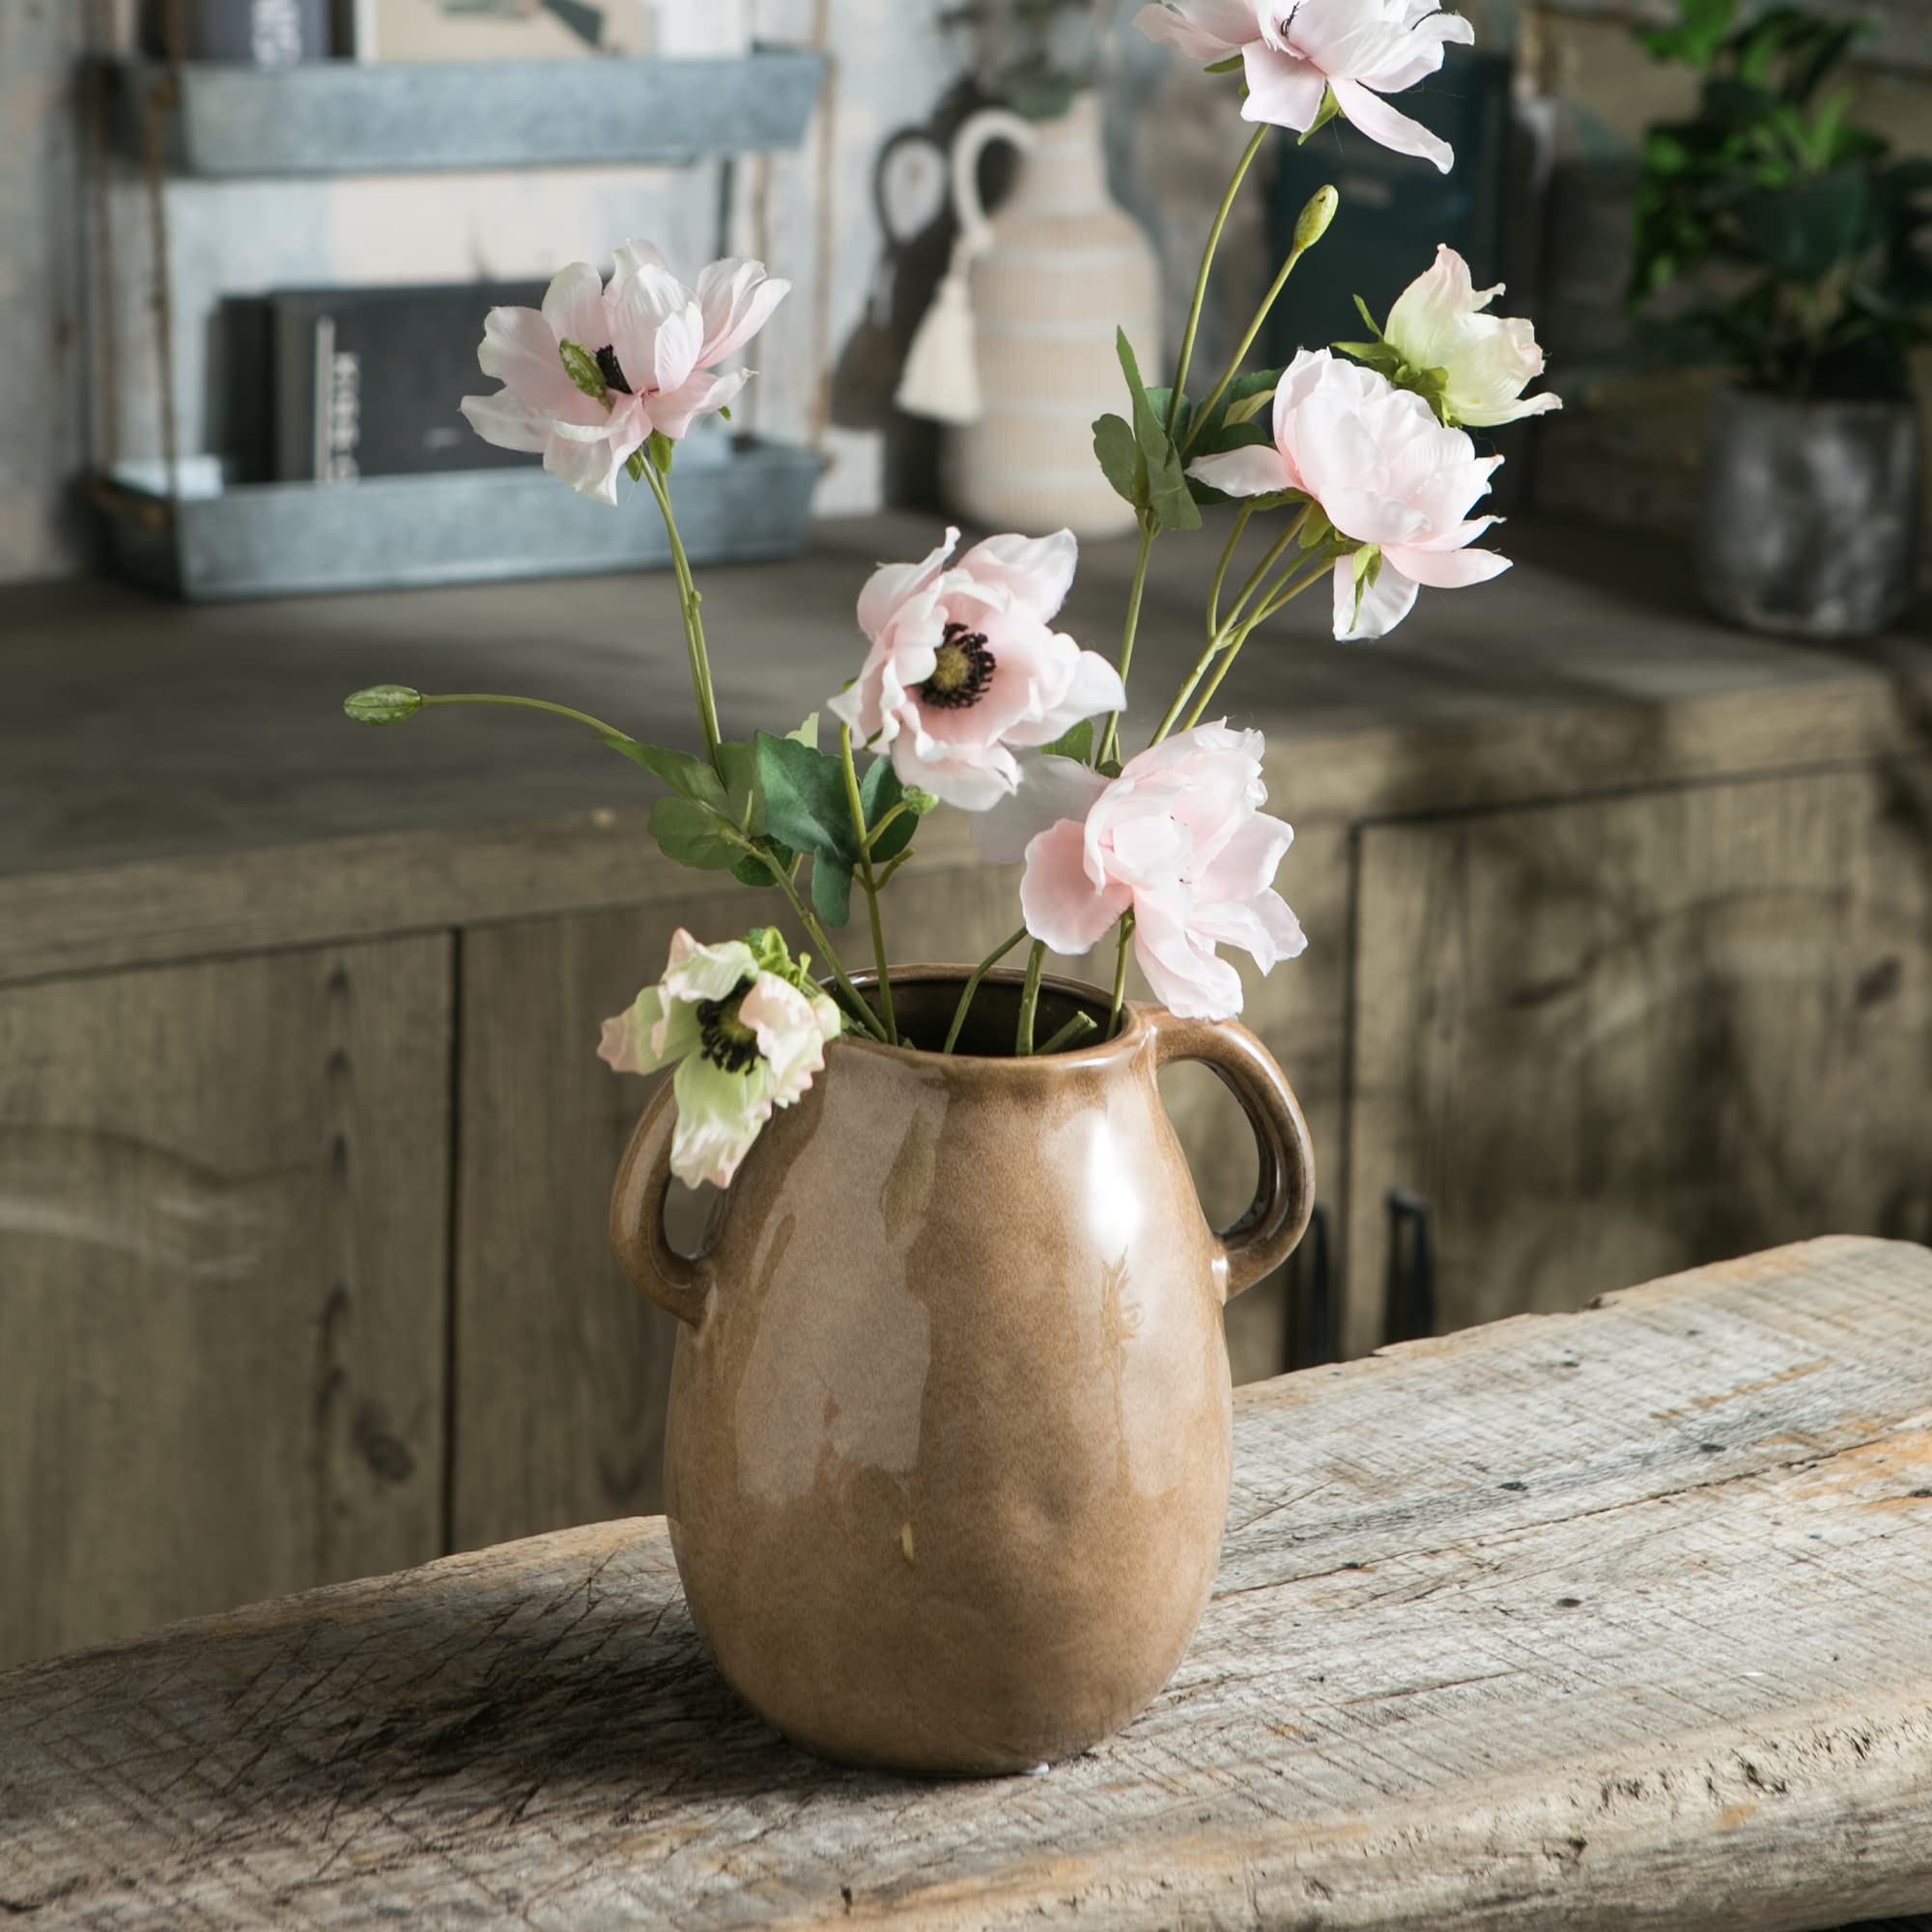 Tanvecle Brown Ceramic Vase with 2 Handles, Modern Farmhouse Vase for Home Decor, Rustic Terracotta Vase, Decorative Pottery Flower Vase, Clay Small Vase, Centerpieces for Dining Table - 7 Inch Tall